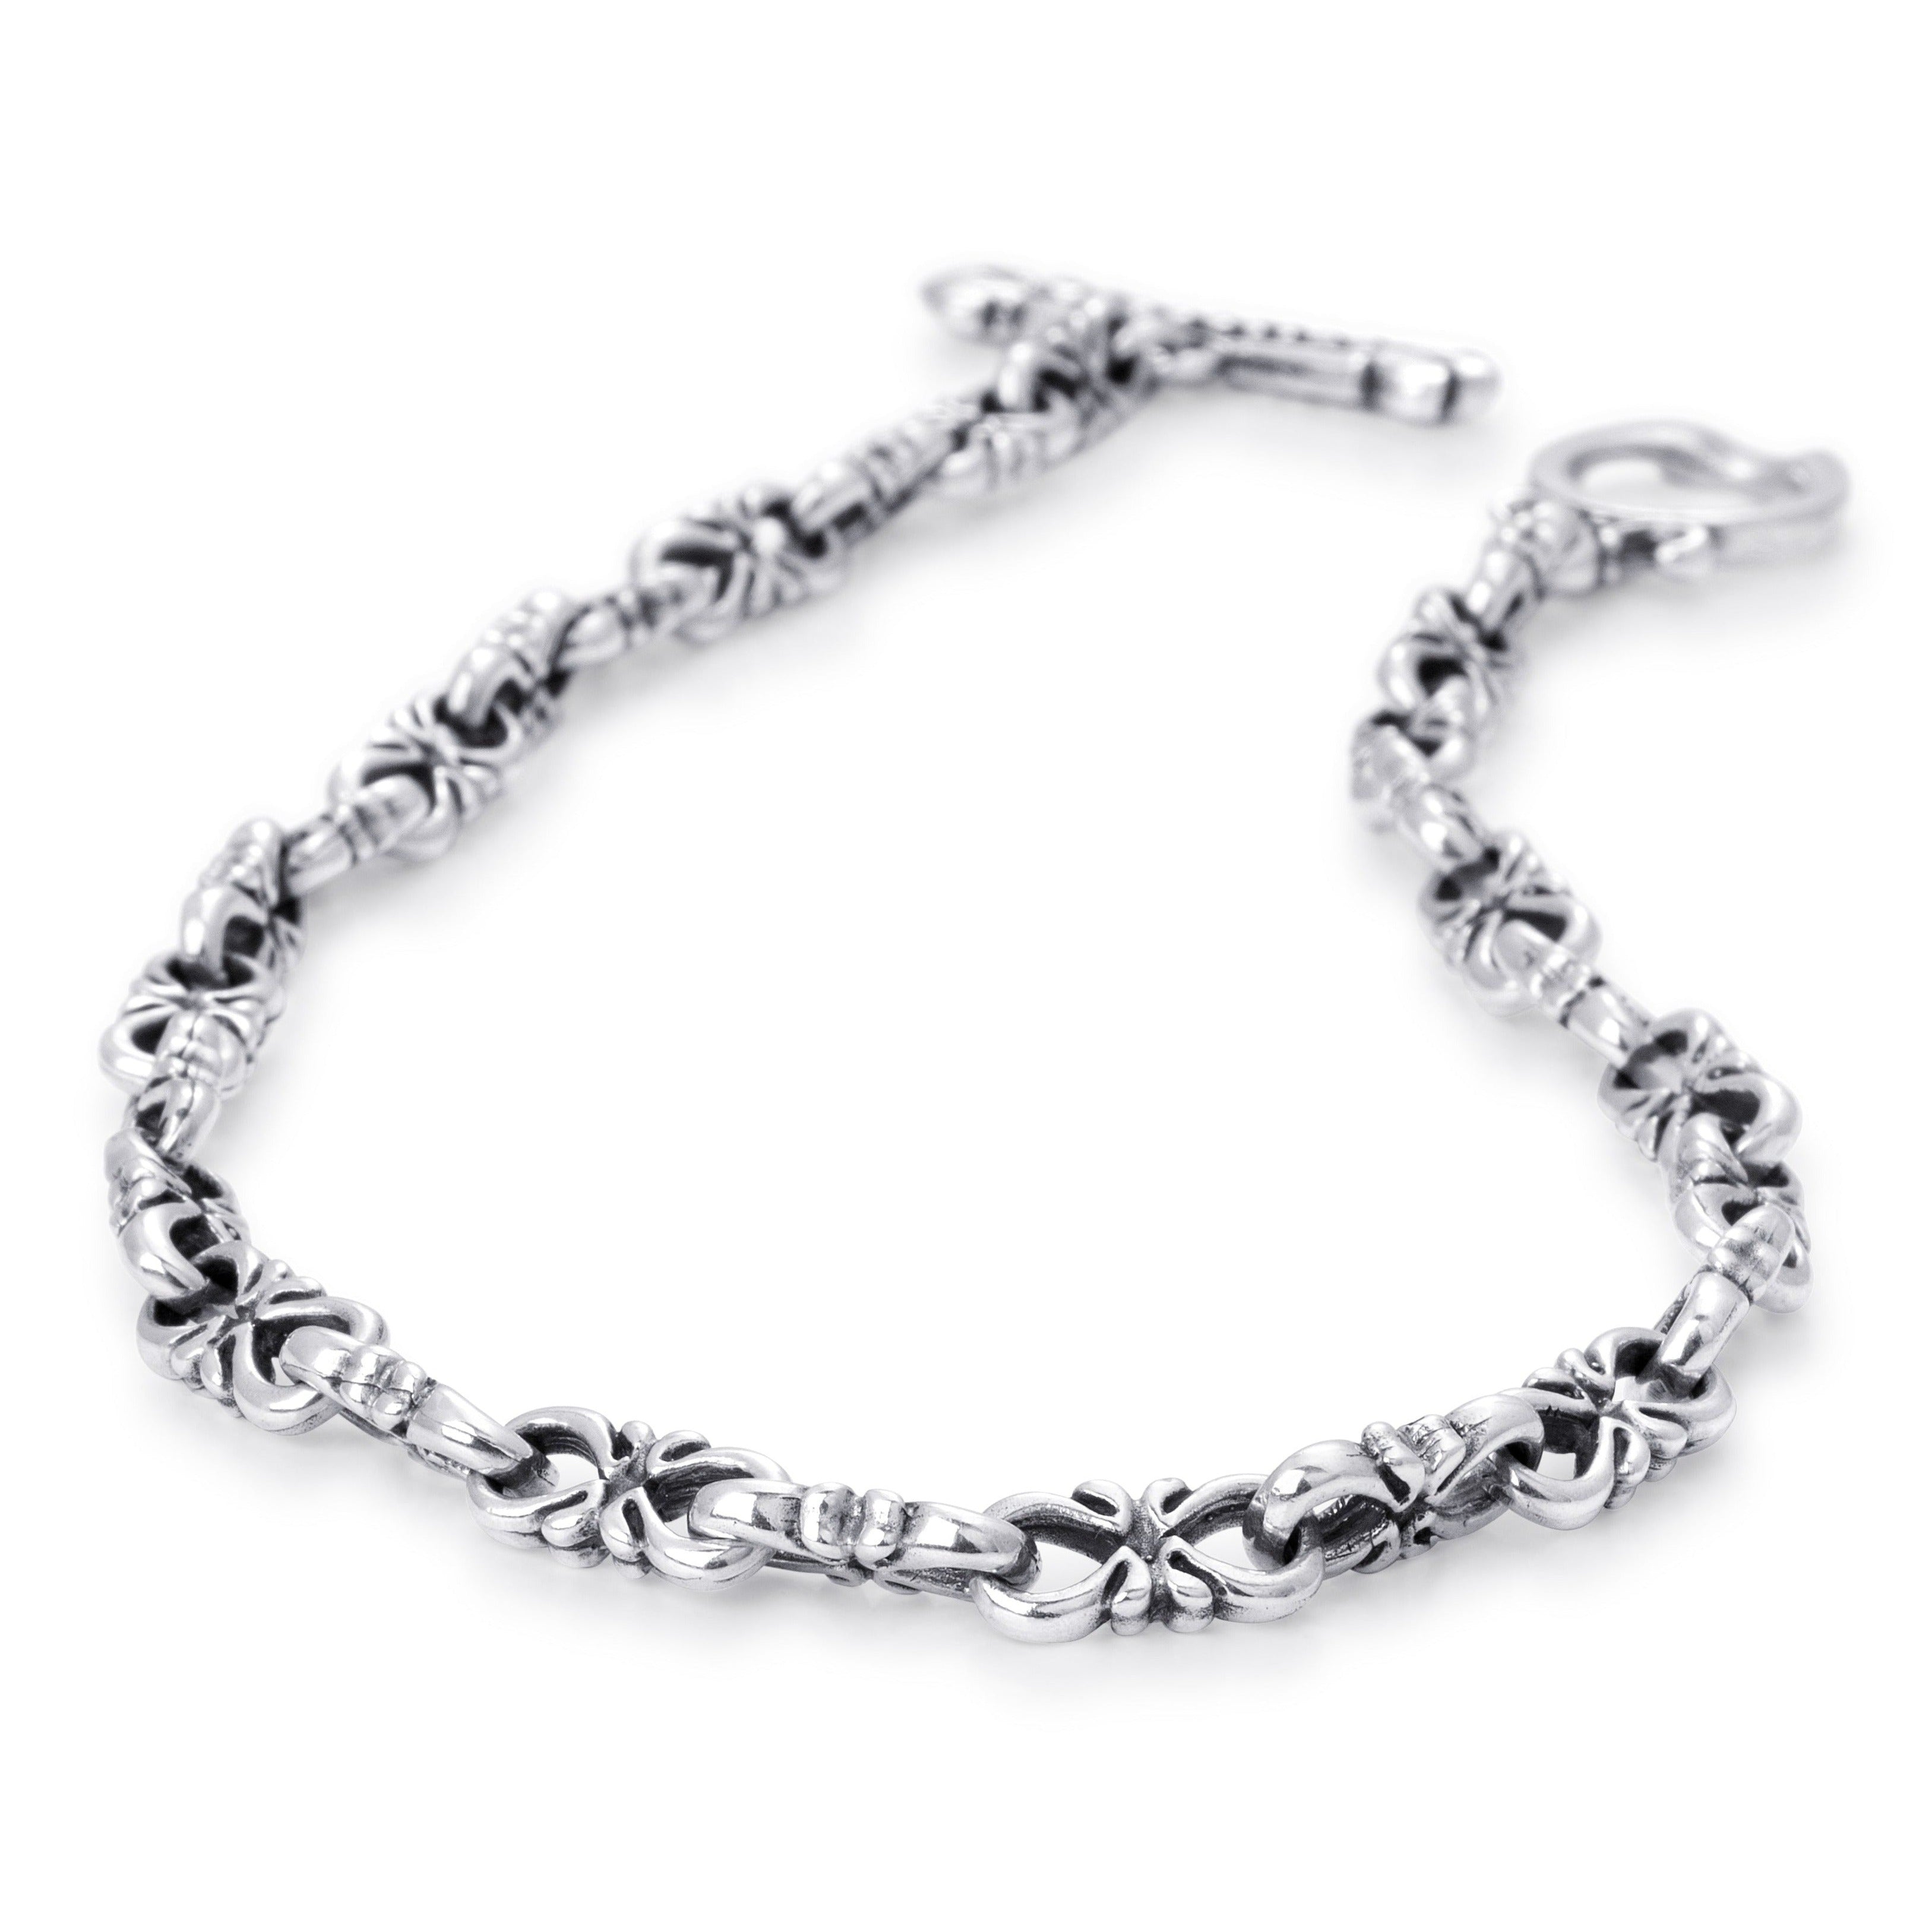 Solid Sterling Silver intricate heavy link chain